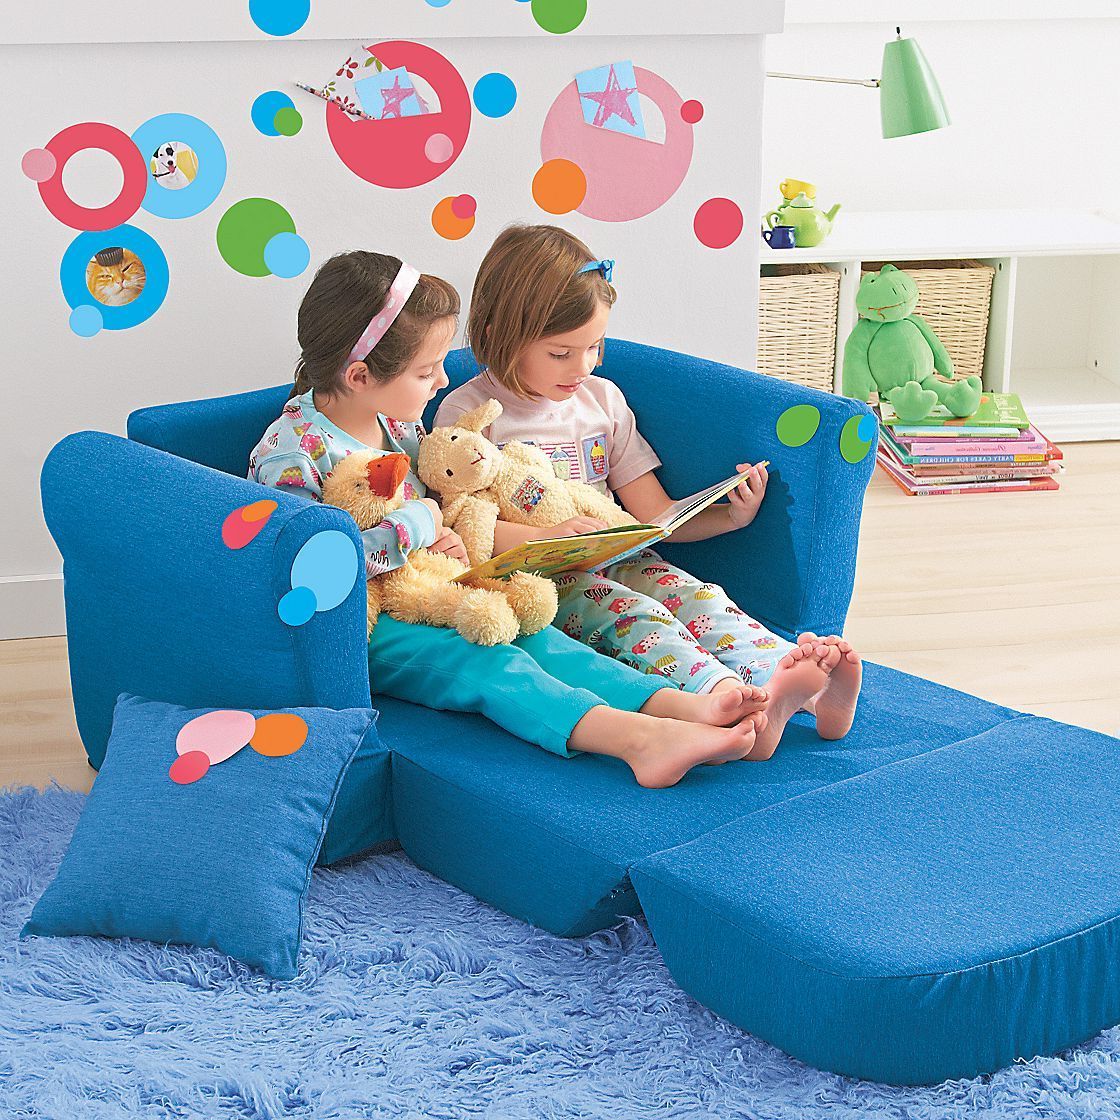 Children's Sofa Beds With Preferred Sites Tcs Site (View 14 of 15)